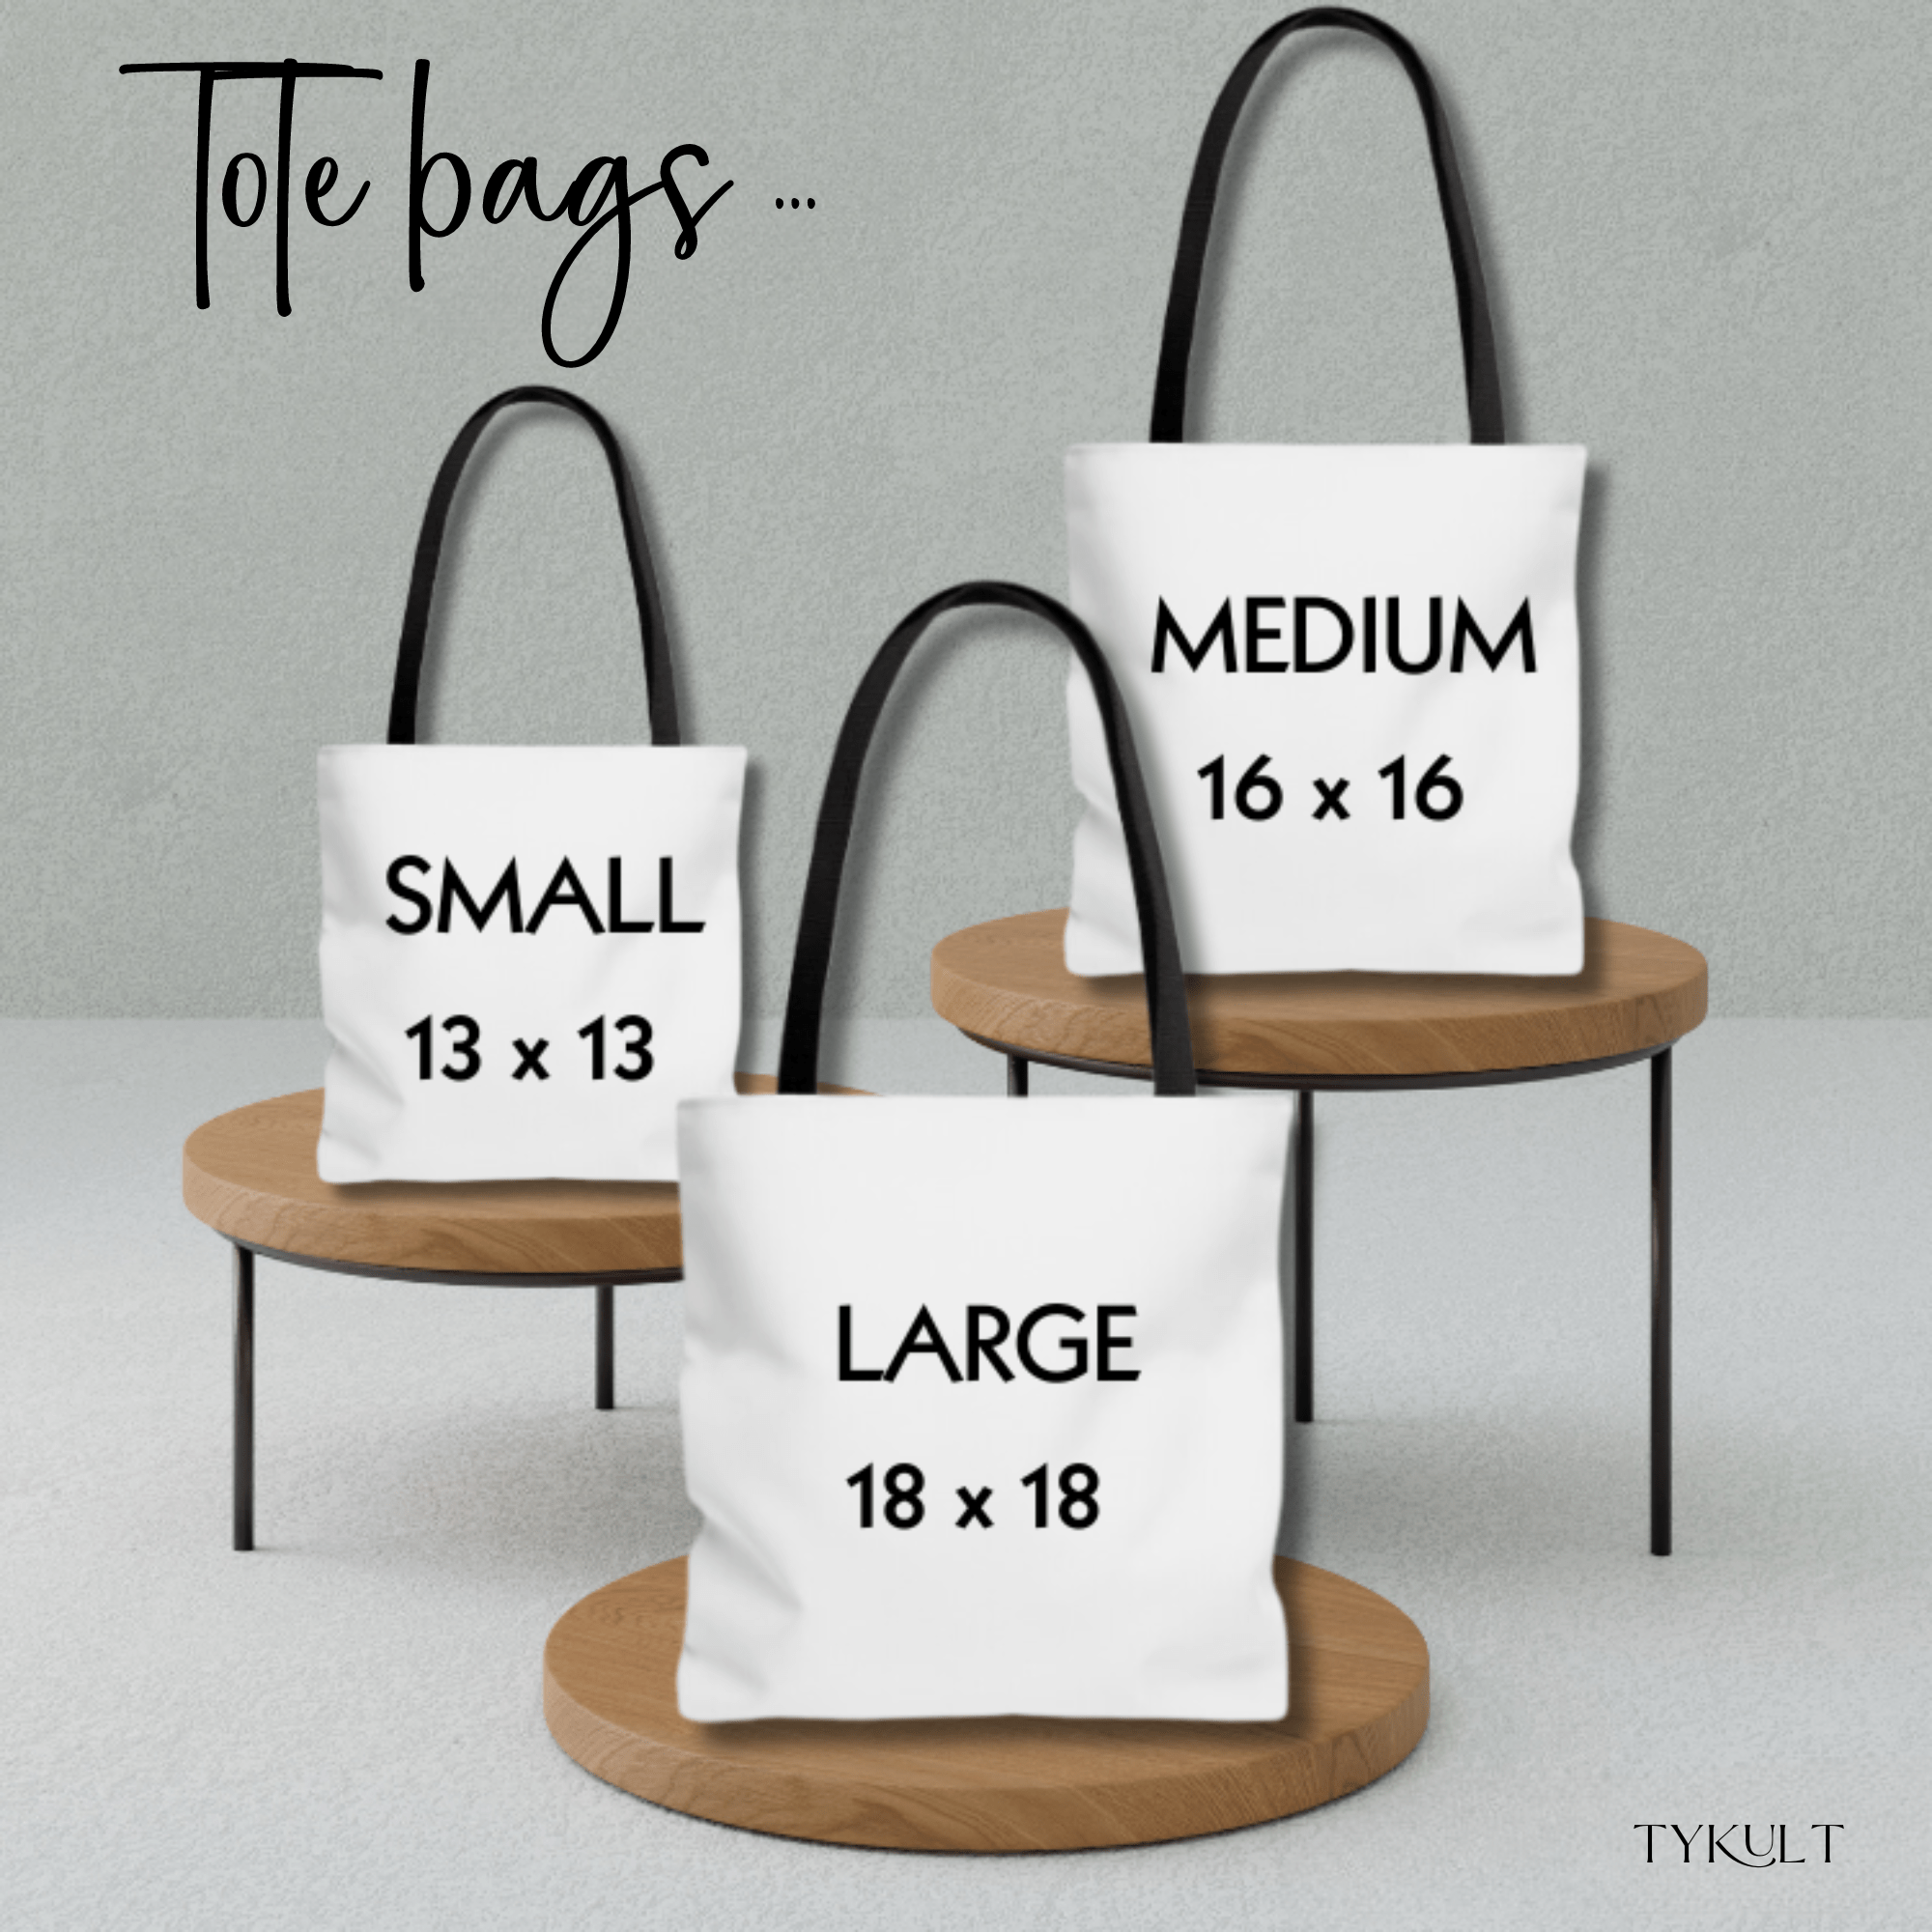 PERSONALIZABLE TOTE BAG | MONOGRAM - K | PERFECT GIFT FOR WIFE, SISTER, CO-WORKER